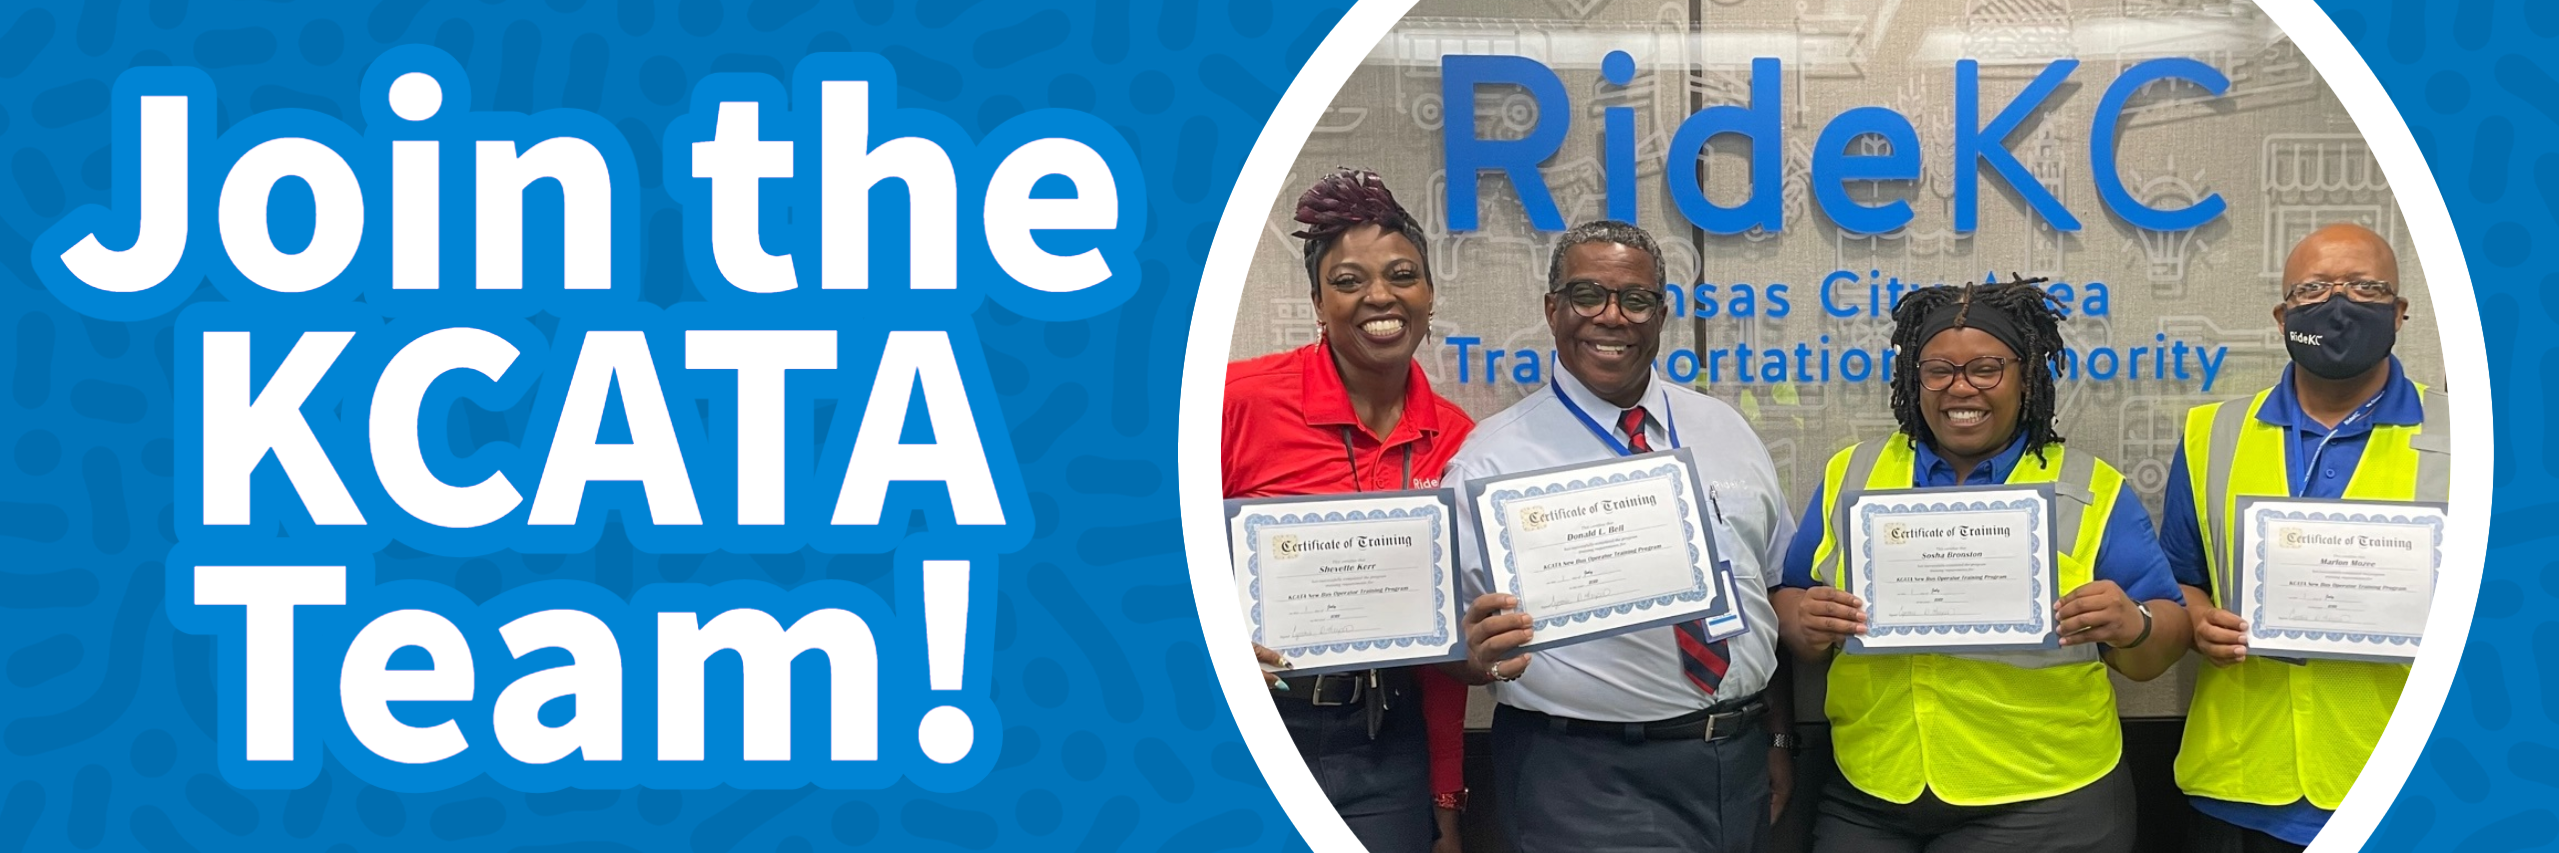 Join the KCATA Team. New RideKC Bus Drivers showing their completion certificates. 